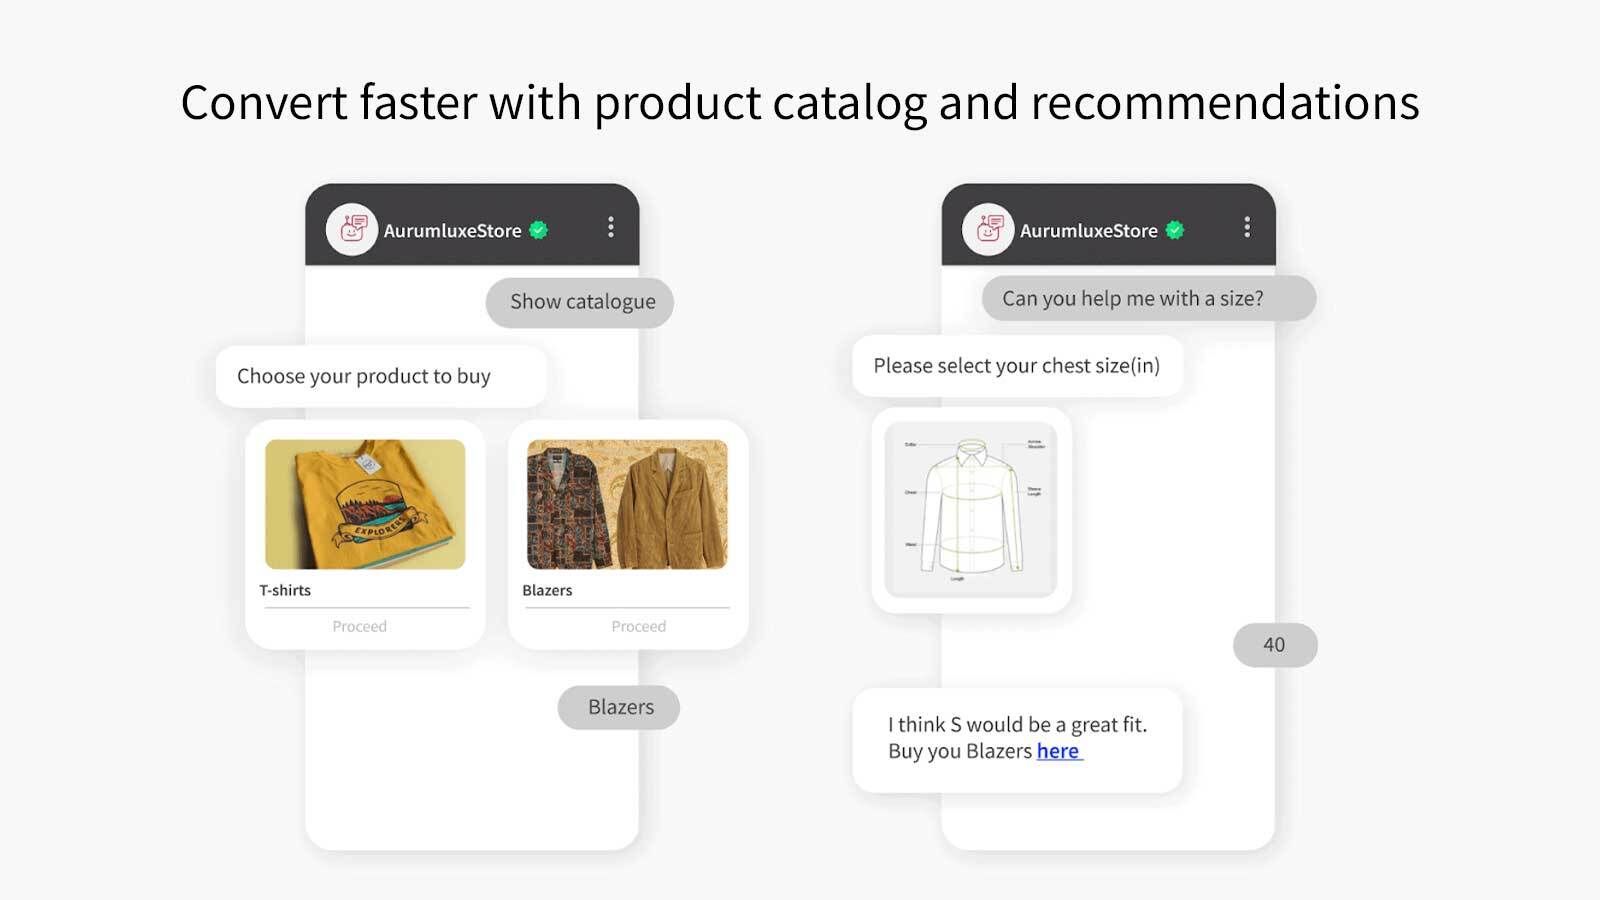 Convert faster with product catalog and recommendations